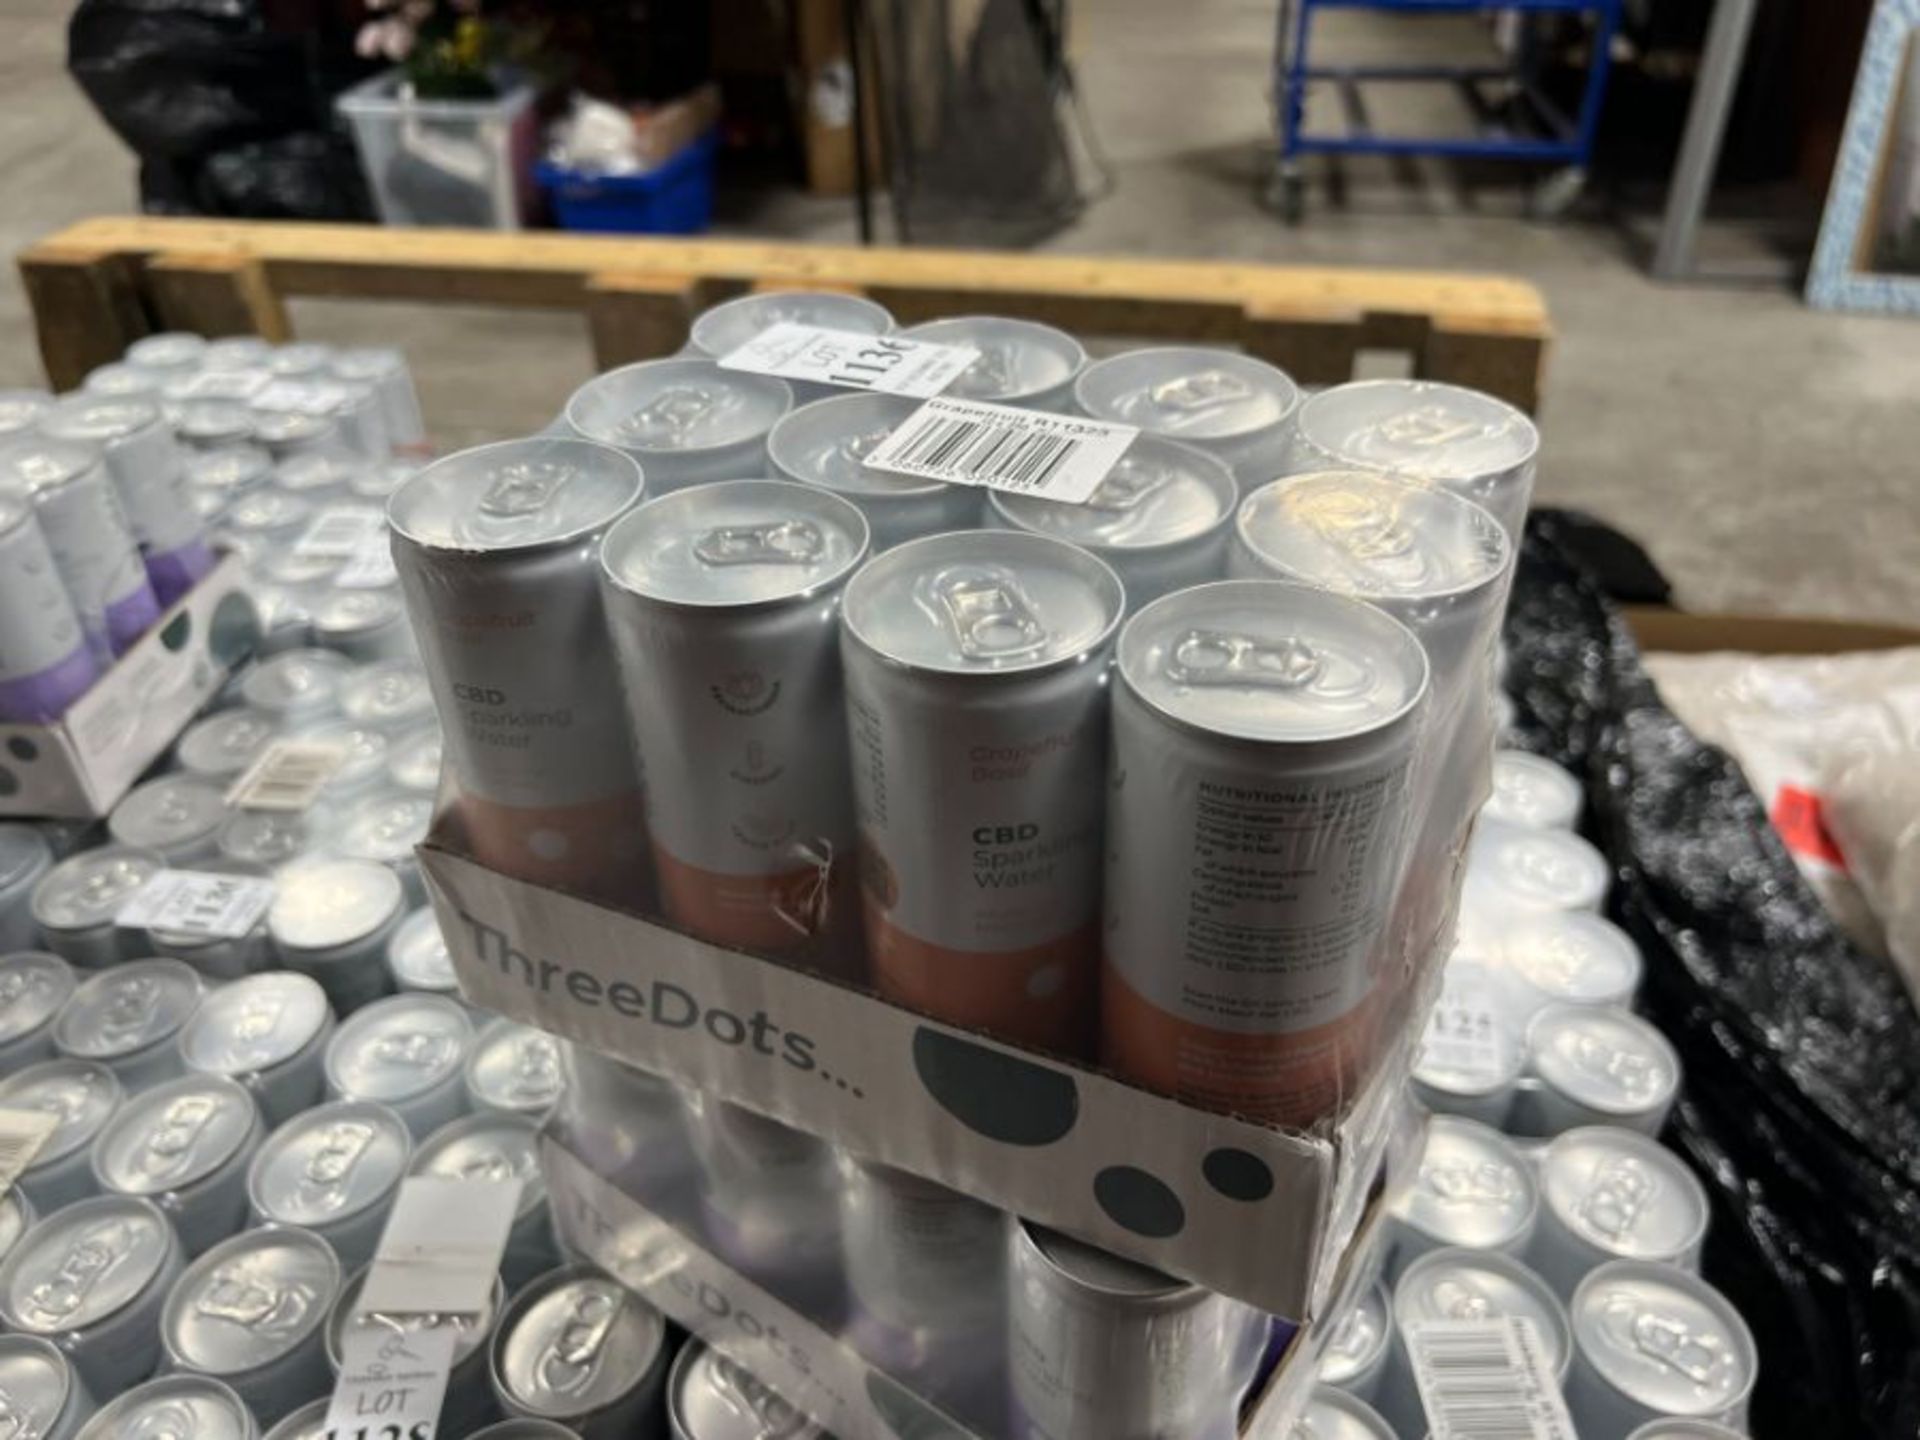 5X CASES OF 12 THREE DOT GRAPEFRUIT SPARKILING WATER